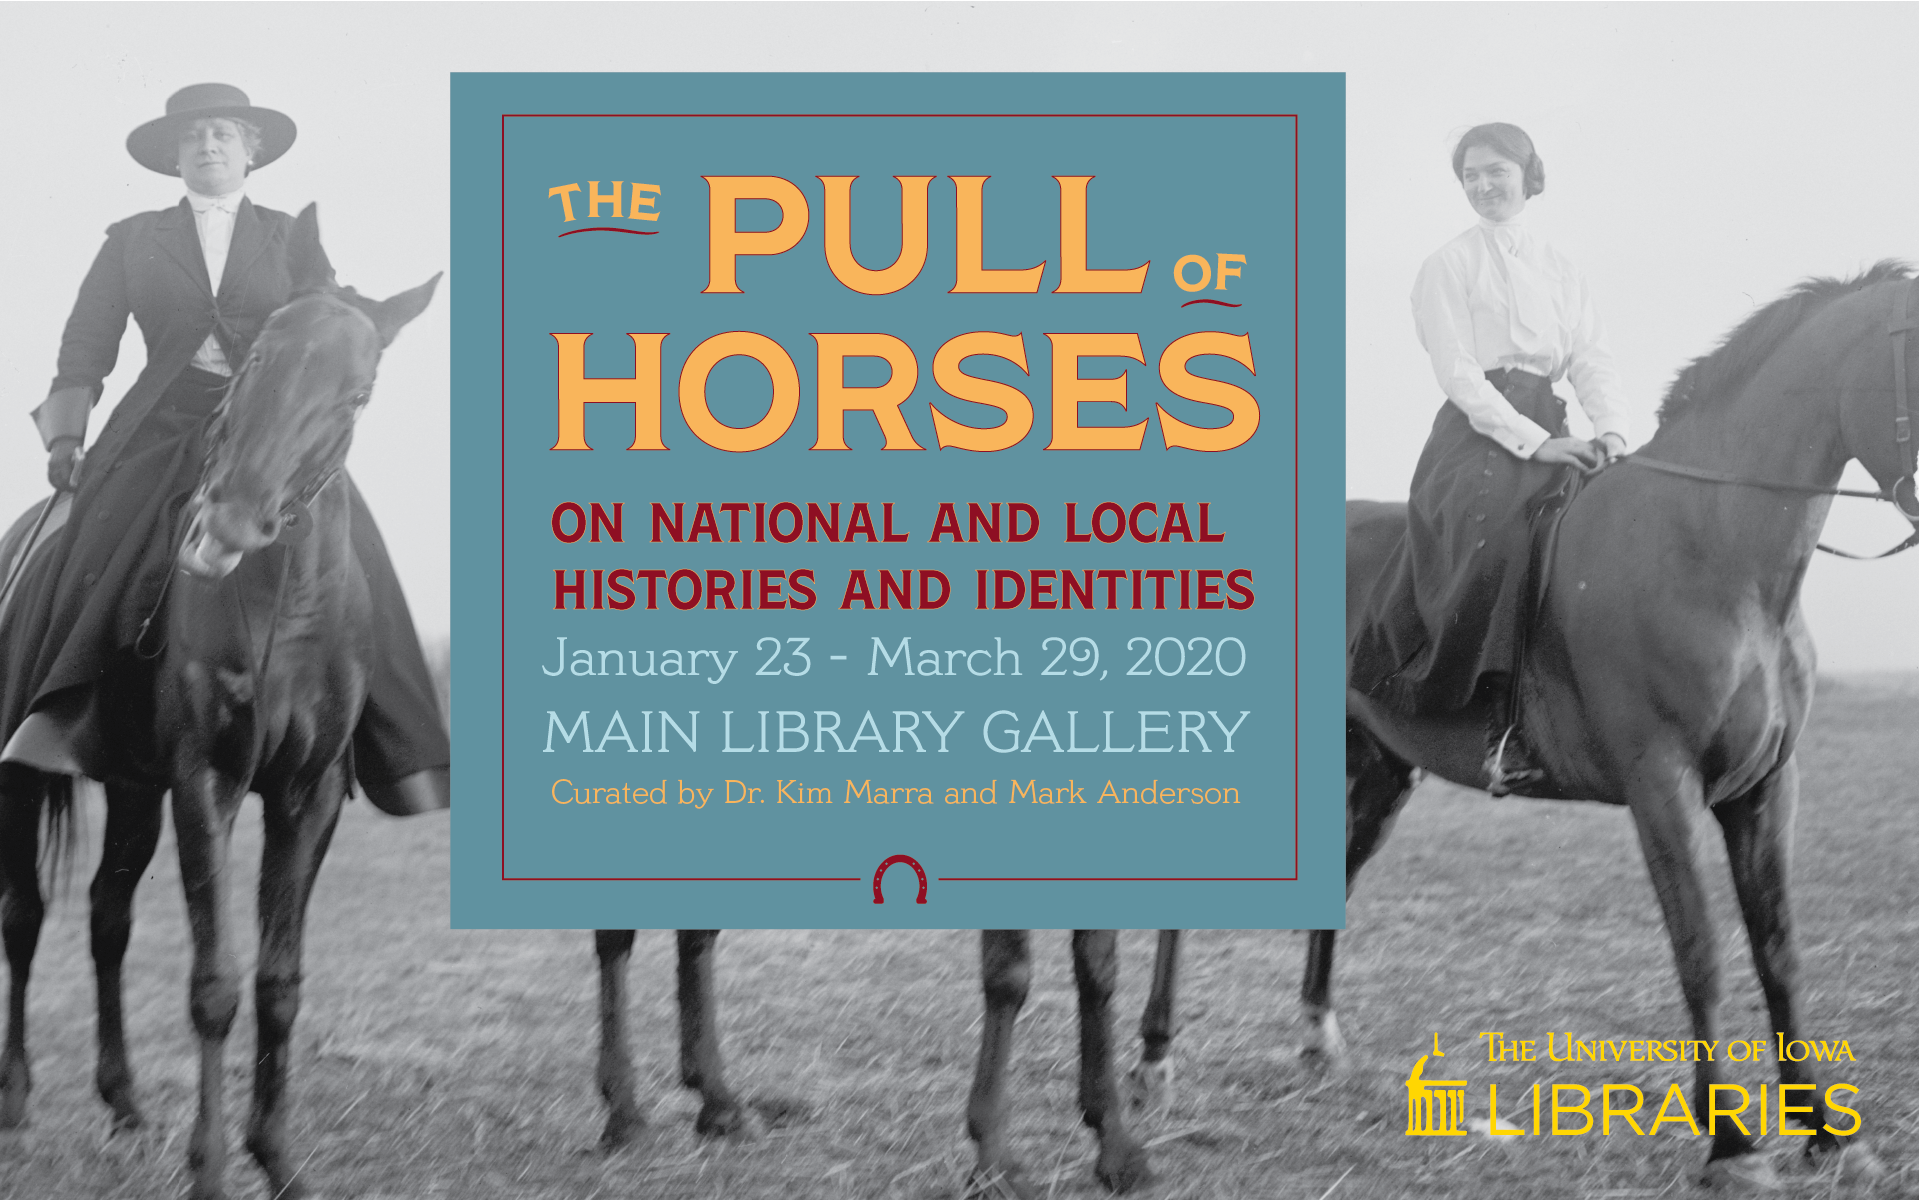 The Pull of Horses on National and Local Histories and Identities. January 23-March 29, 2020. Main Library Gallery. Curated by Dr. Kim Marra and Mark Anderson. The University of Iowa Libraries. Photo of two women riding horses.